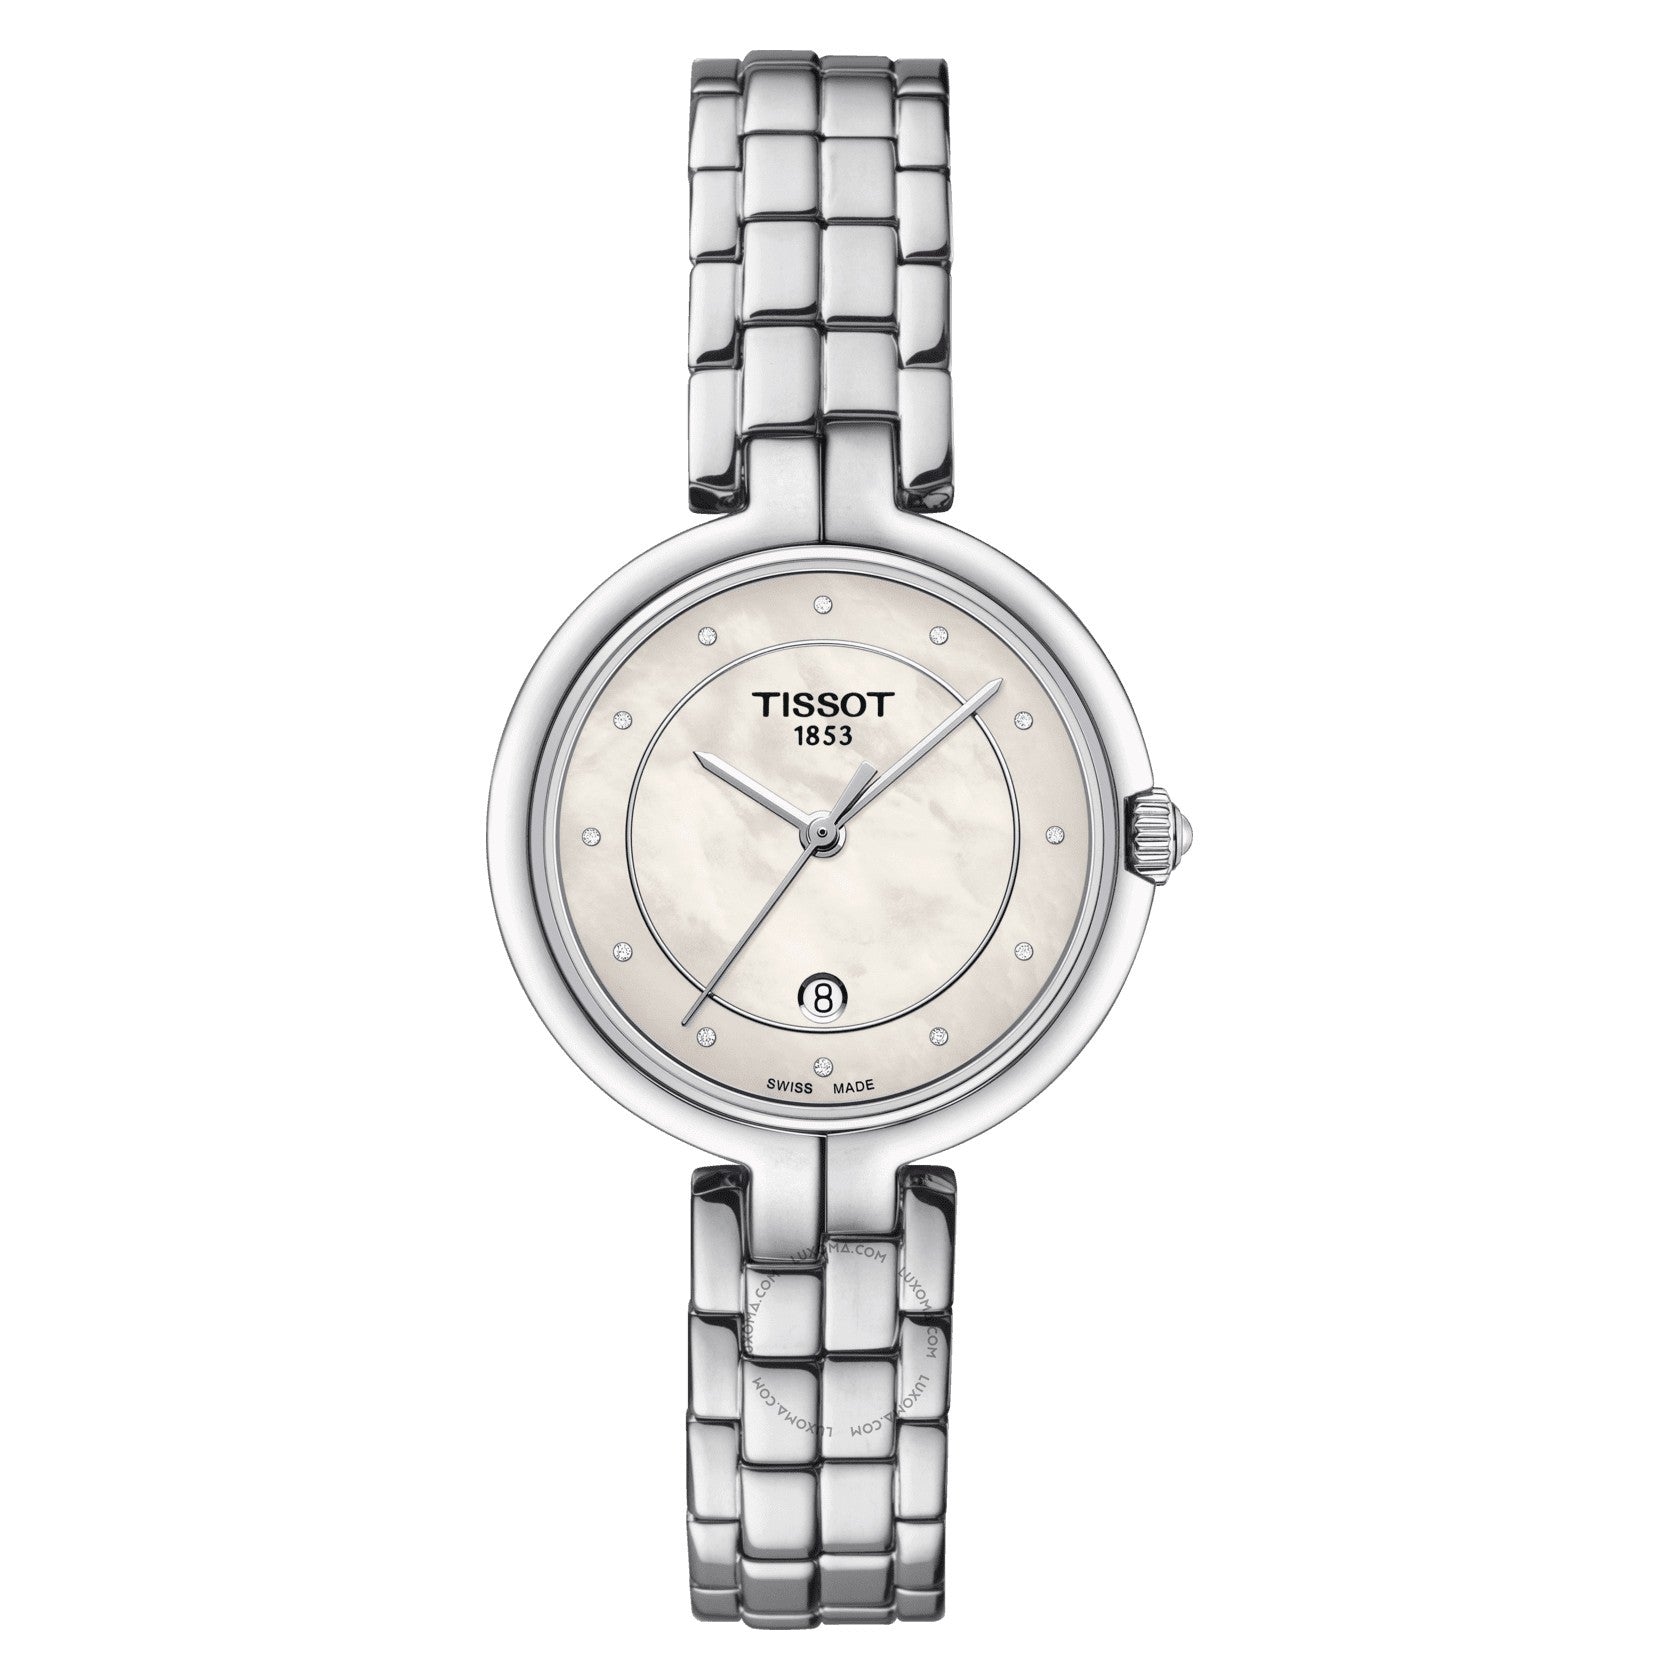 Tissot T-Lady Quartz White Mother-of-Pearl Dial Ladies Watch T094.210.11.116.01